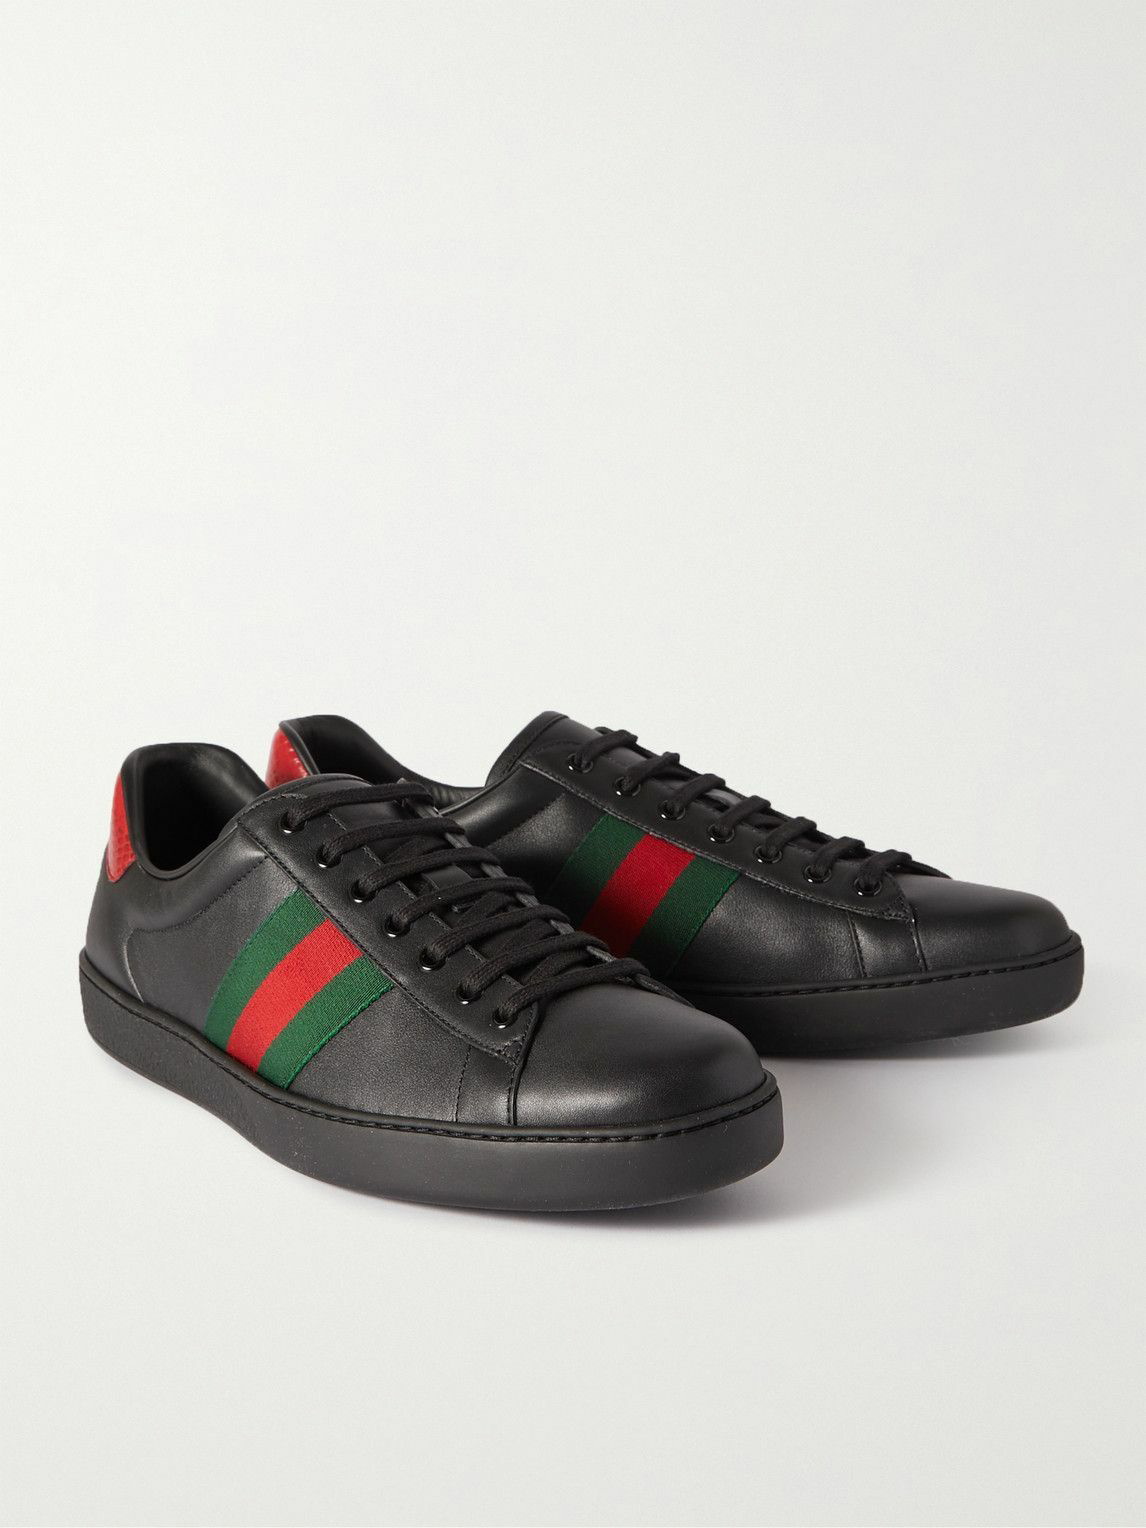 GUCCI - Ace Faux Watersnake-Trimmed Leather Sneakers - Black Gucci